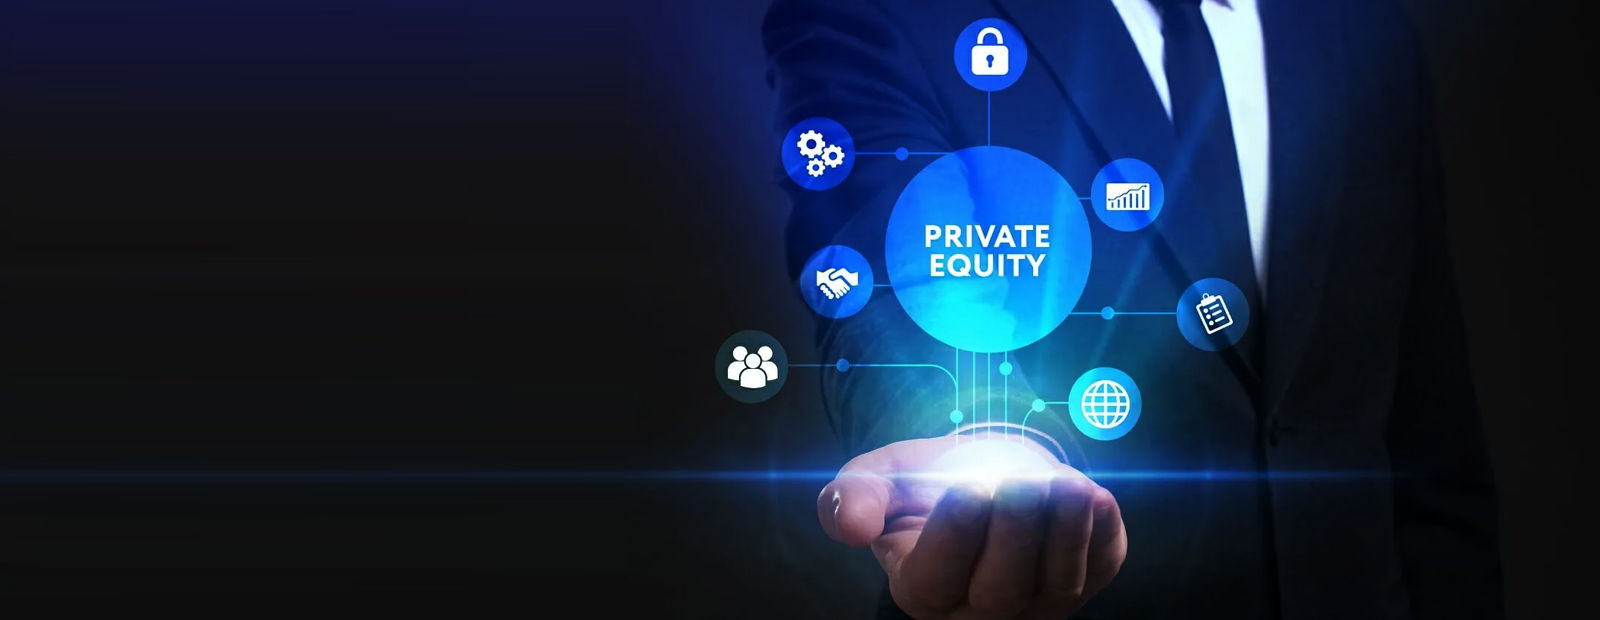 How to Get into Private Equity | USPEC